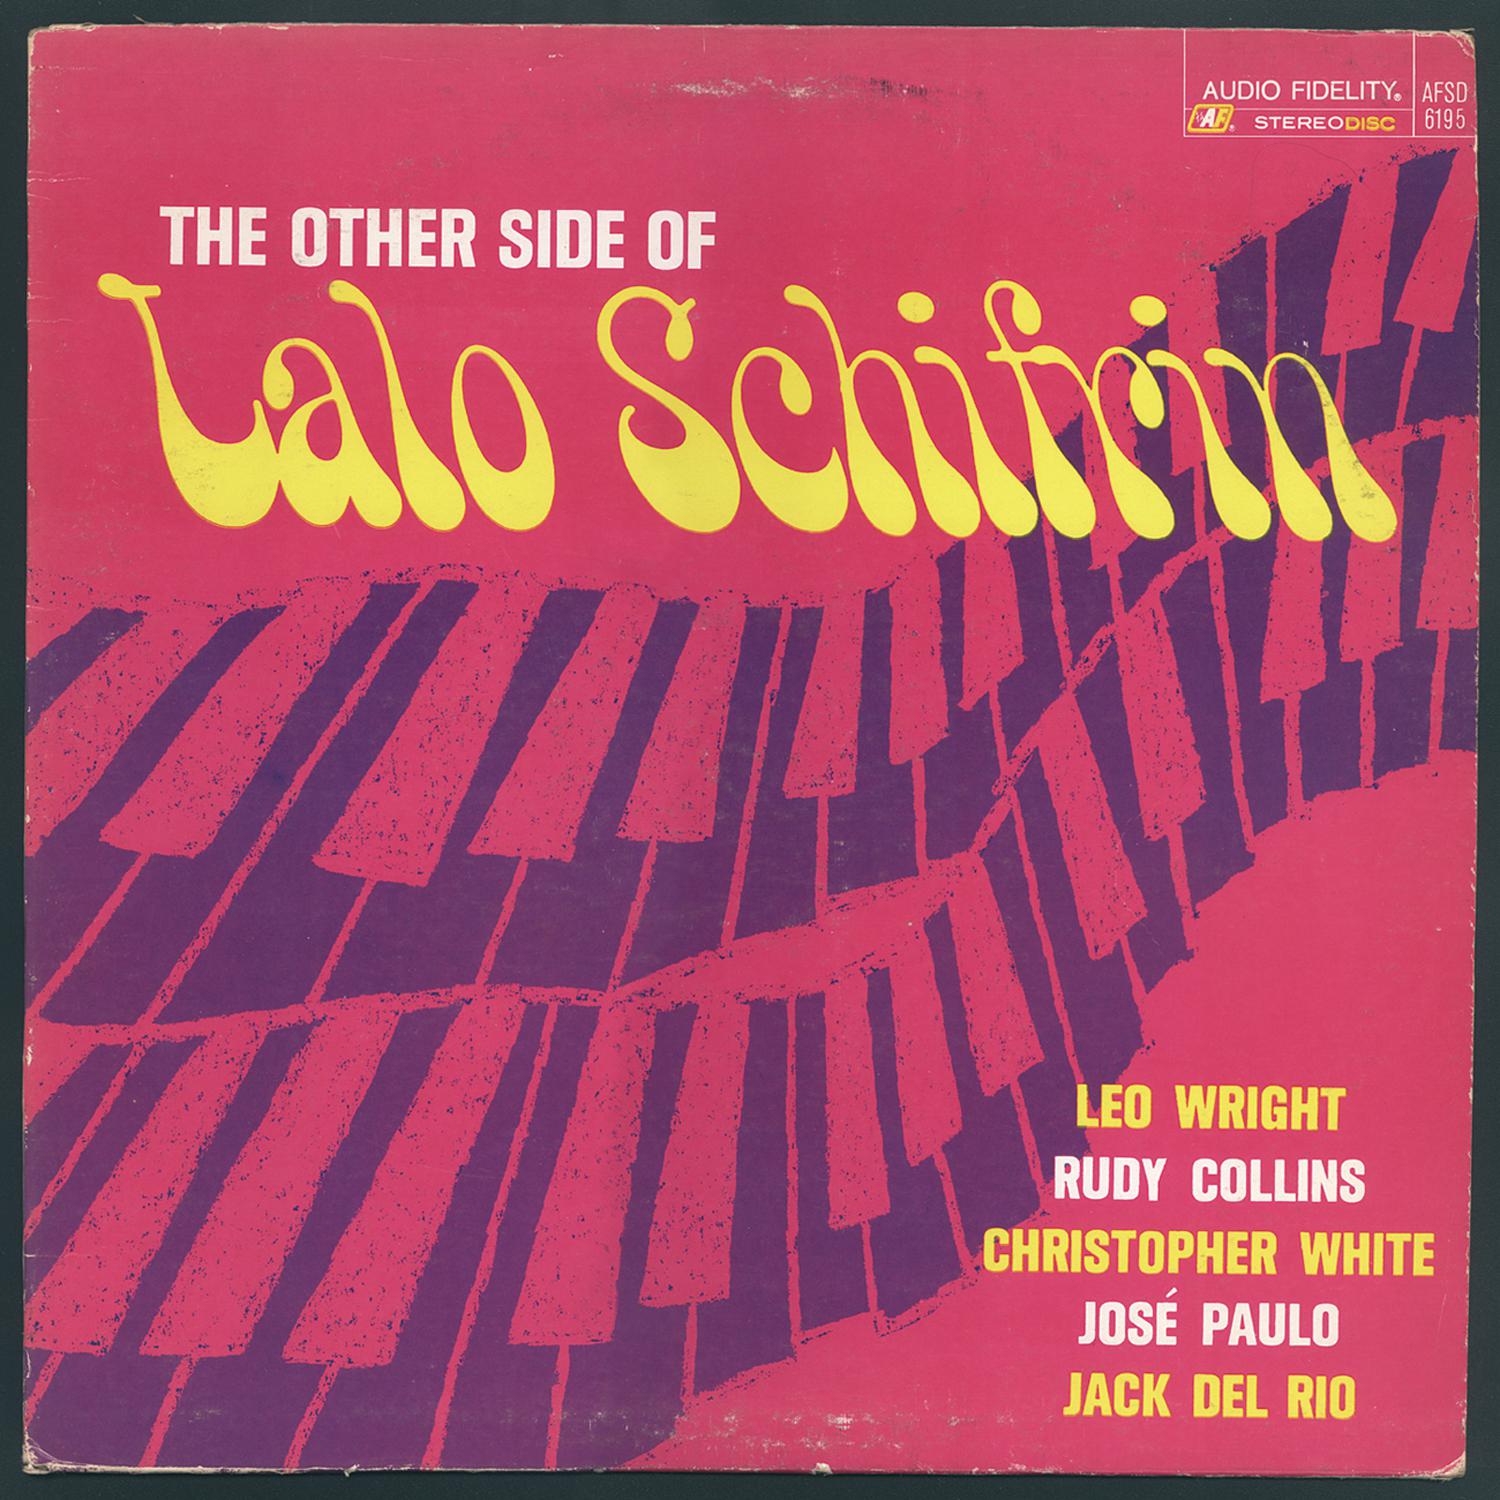 The Other Side Of Lalo Schrifin